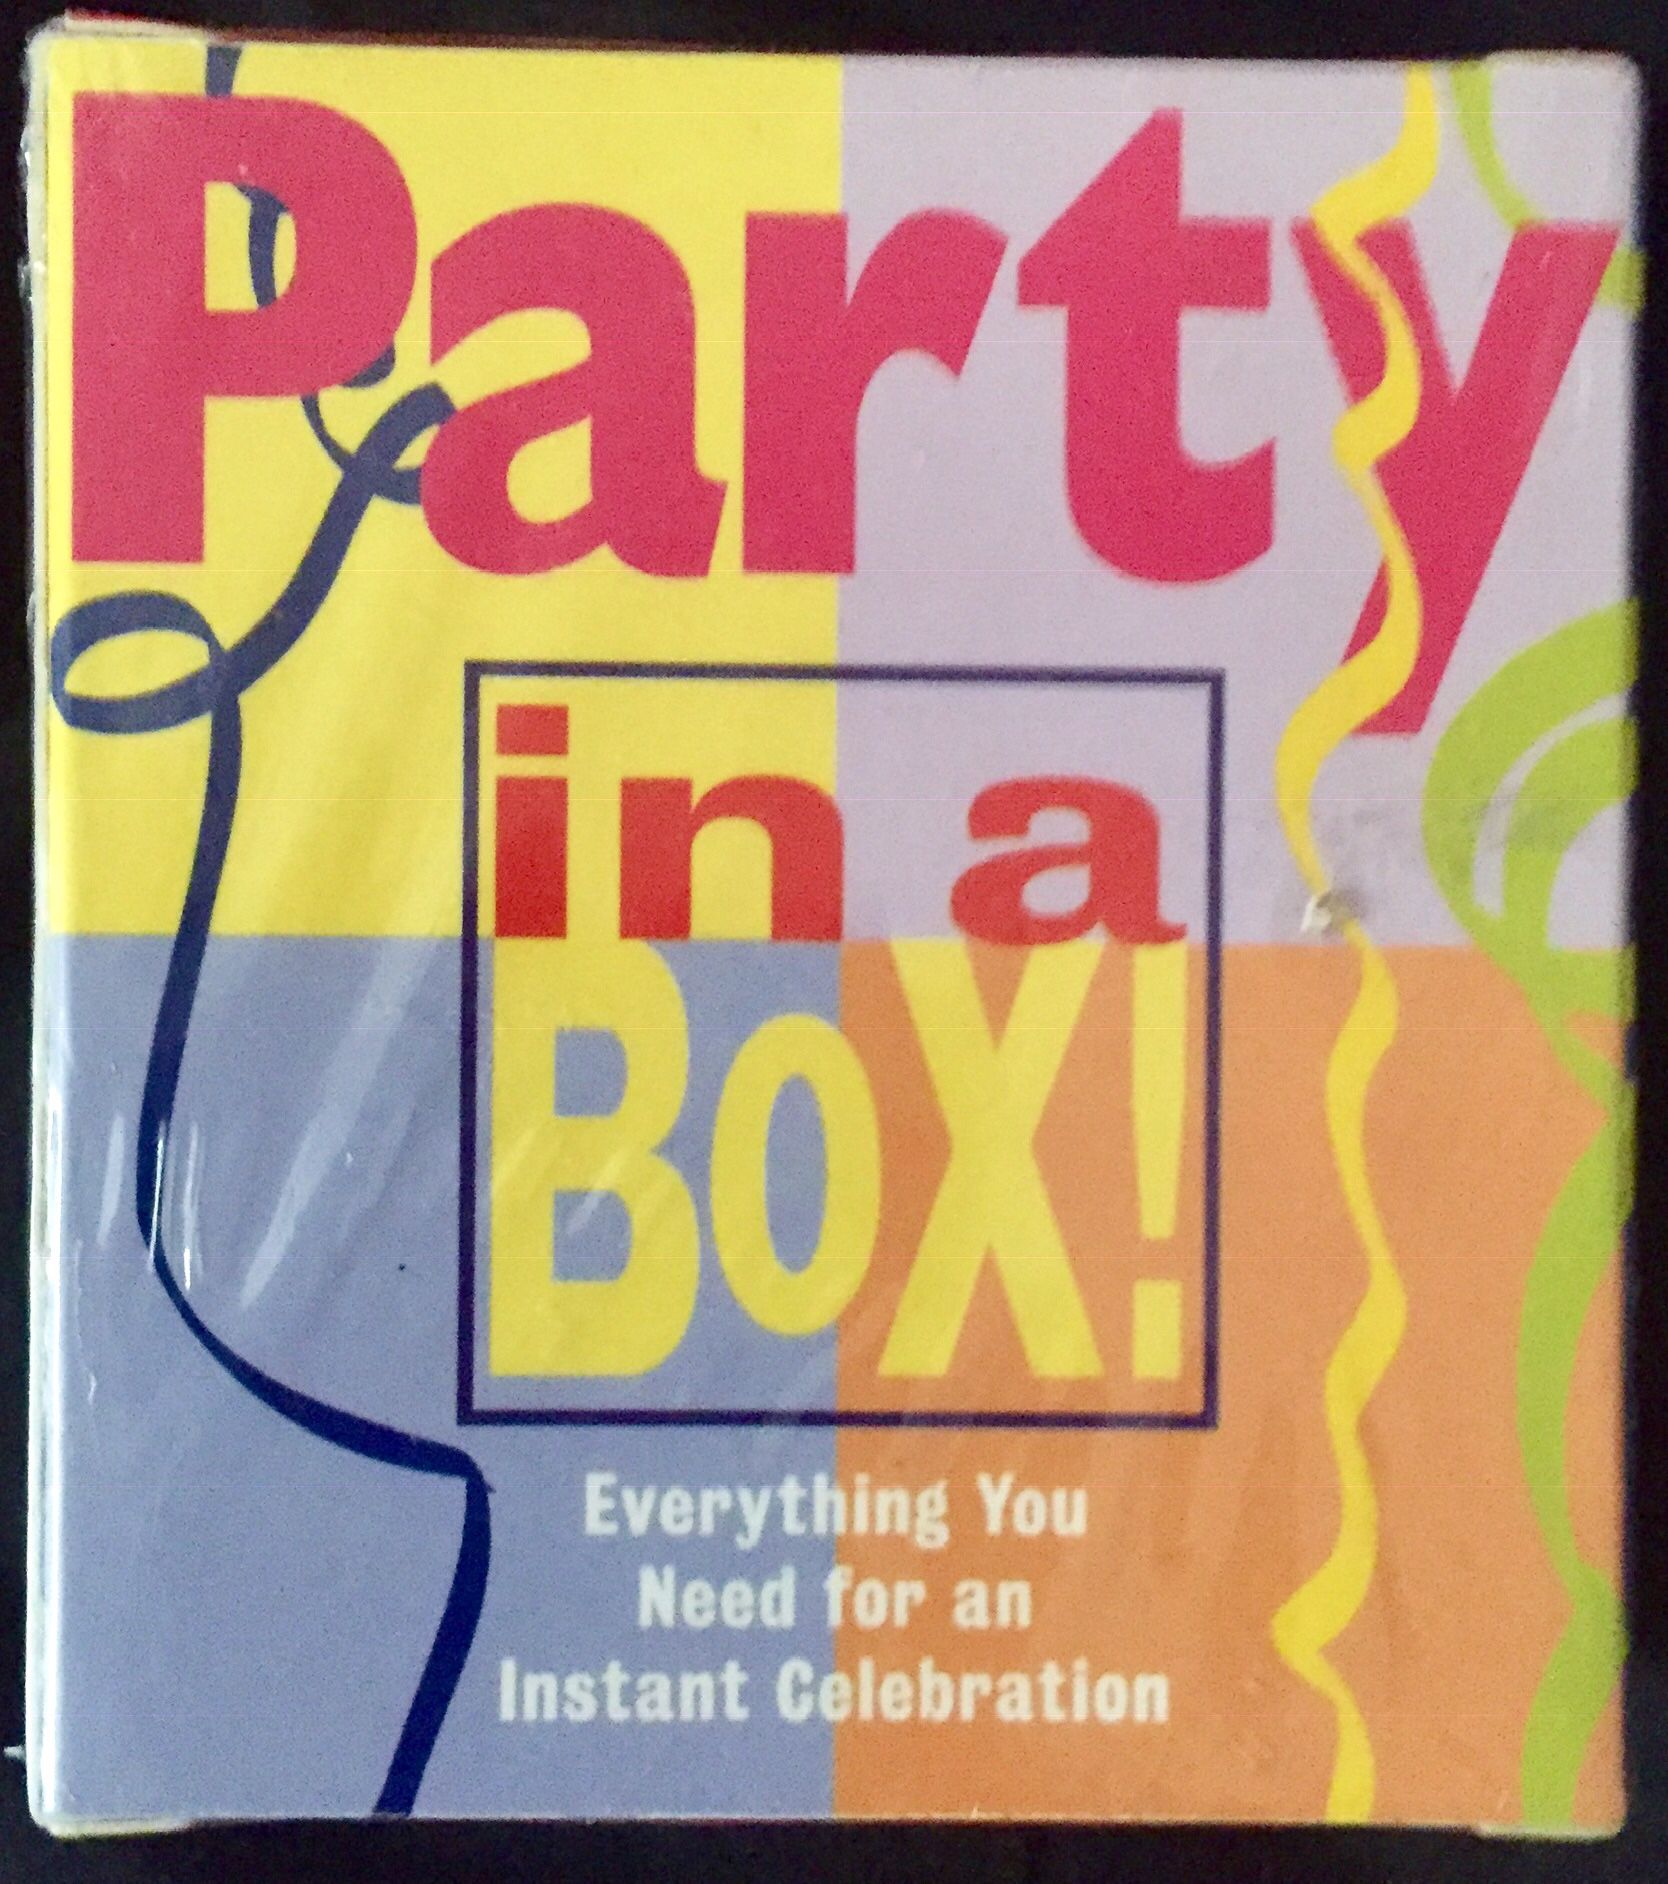 Party in a box